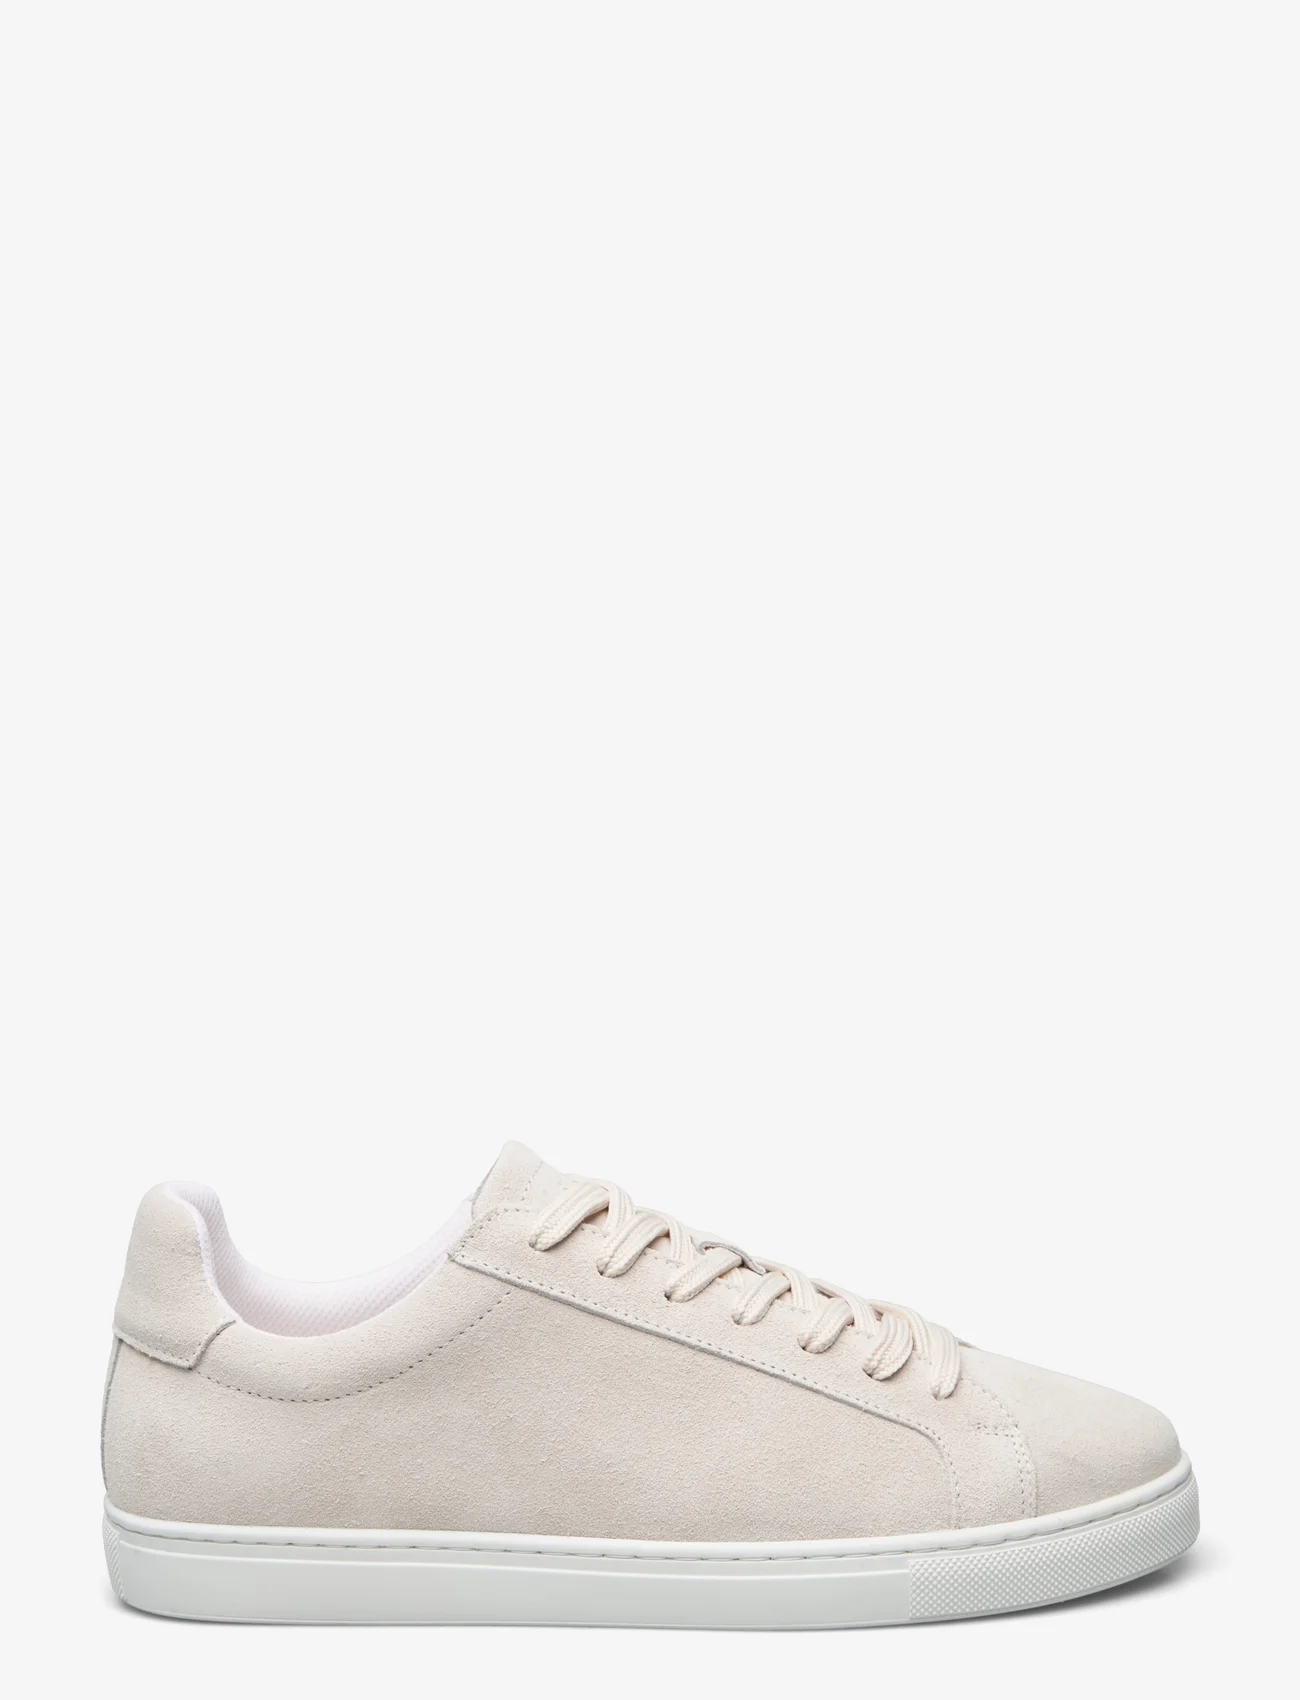 Selected Homme - SLHEVAN NEW SUEDE SNEAKER - przed kostkę - white - 1